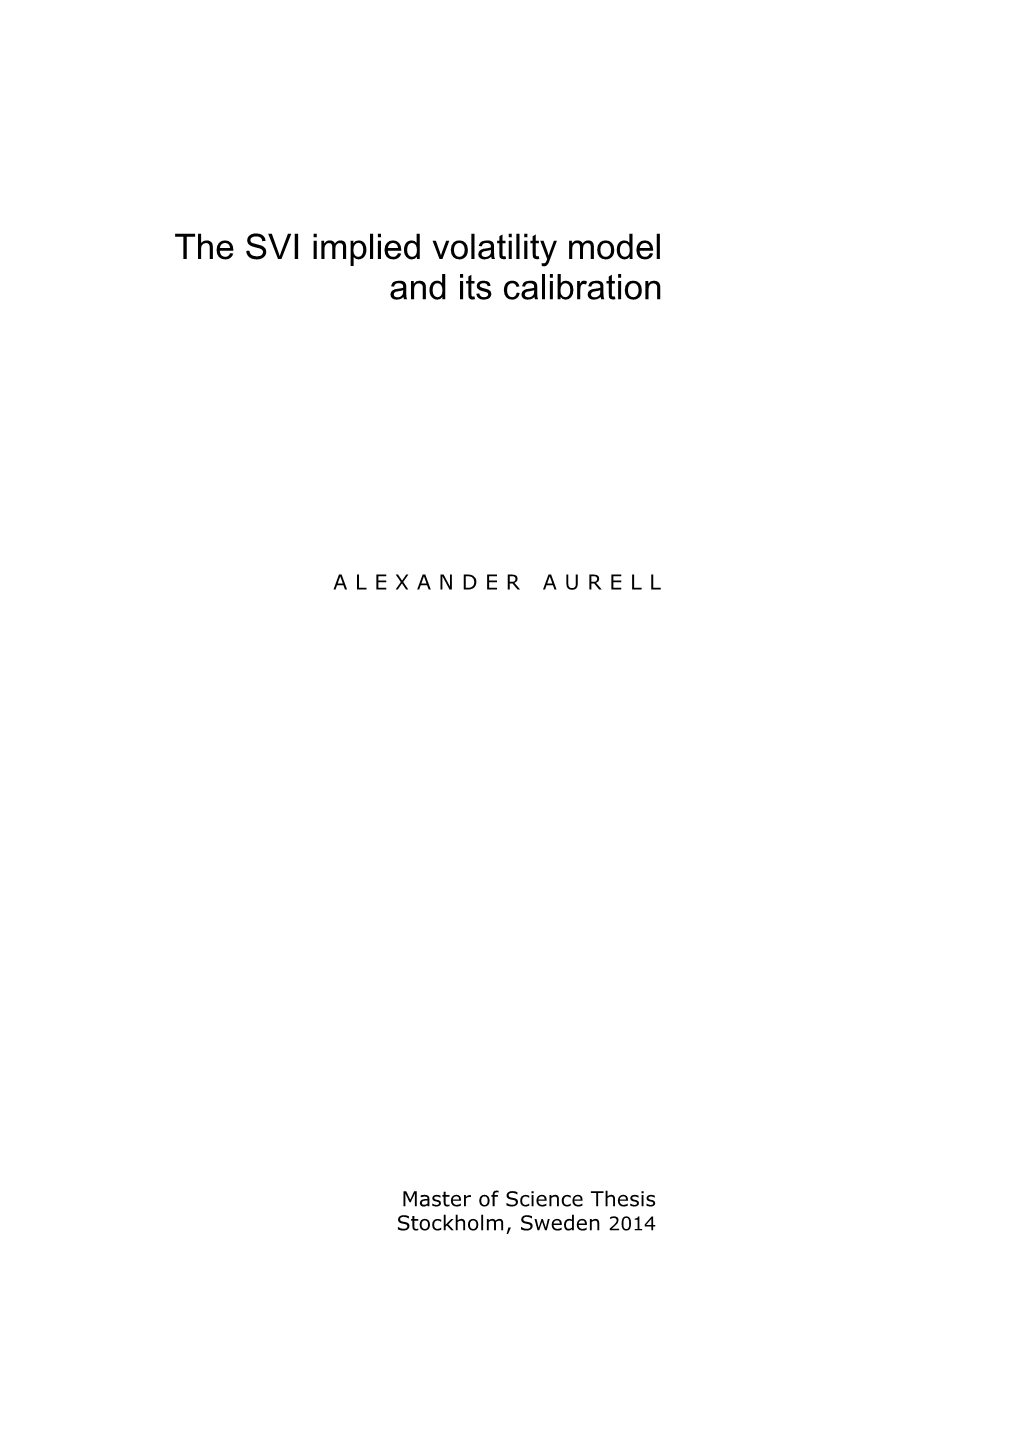 The SVI Implied Volatility Model and Its Calibration